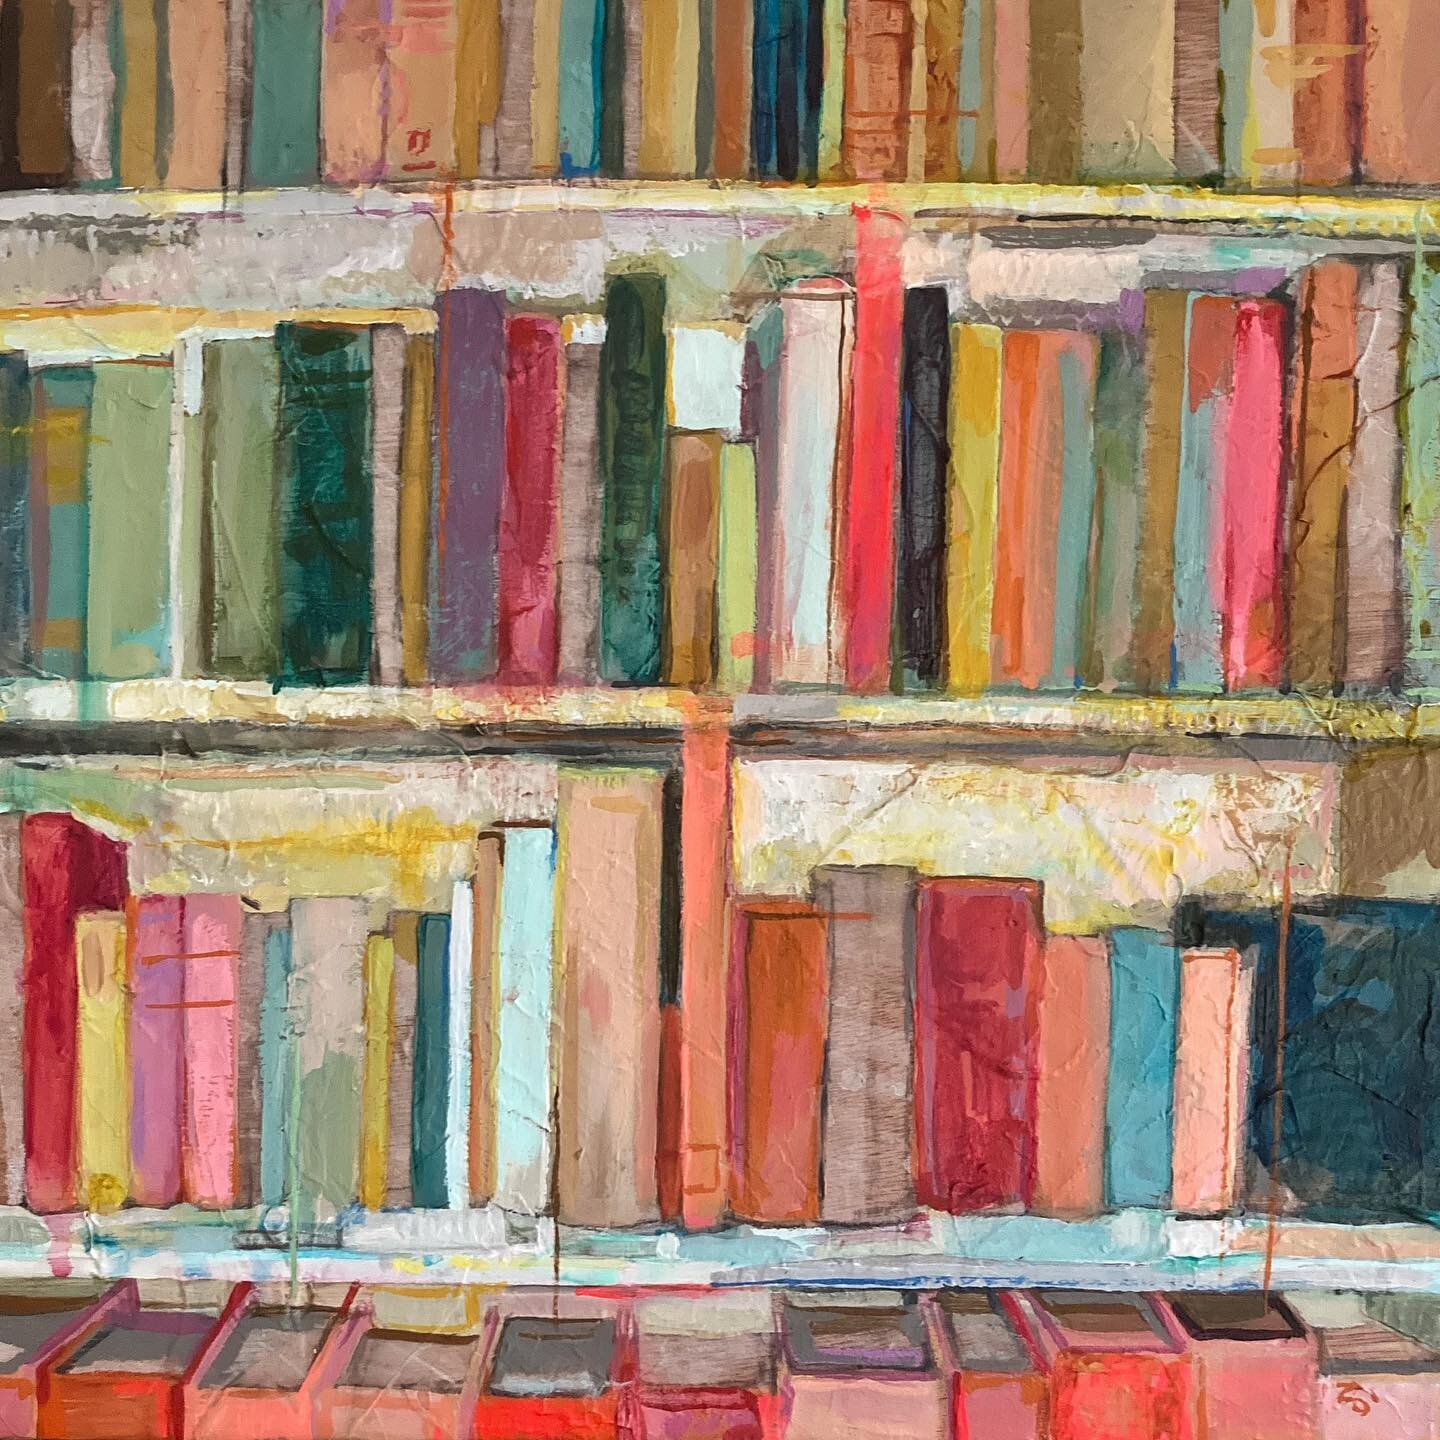 As yet untitled (as usual) 12 x 12&rdquo; acrylic on Ply.

The beautiful photo of the bookshelves at @cottagebytheloch got stuck in my eyes and I had to paint it. My own bookshelves just haven&rsquo;t done it for me in the same way, as inspiring as t